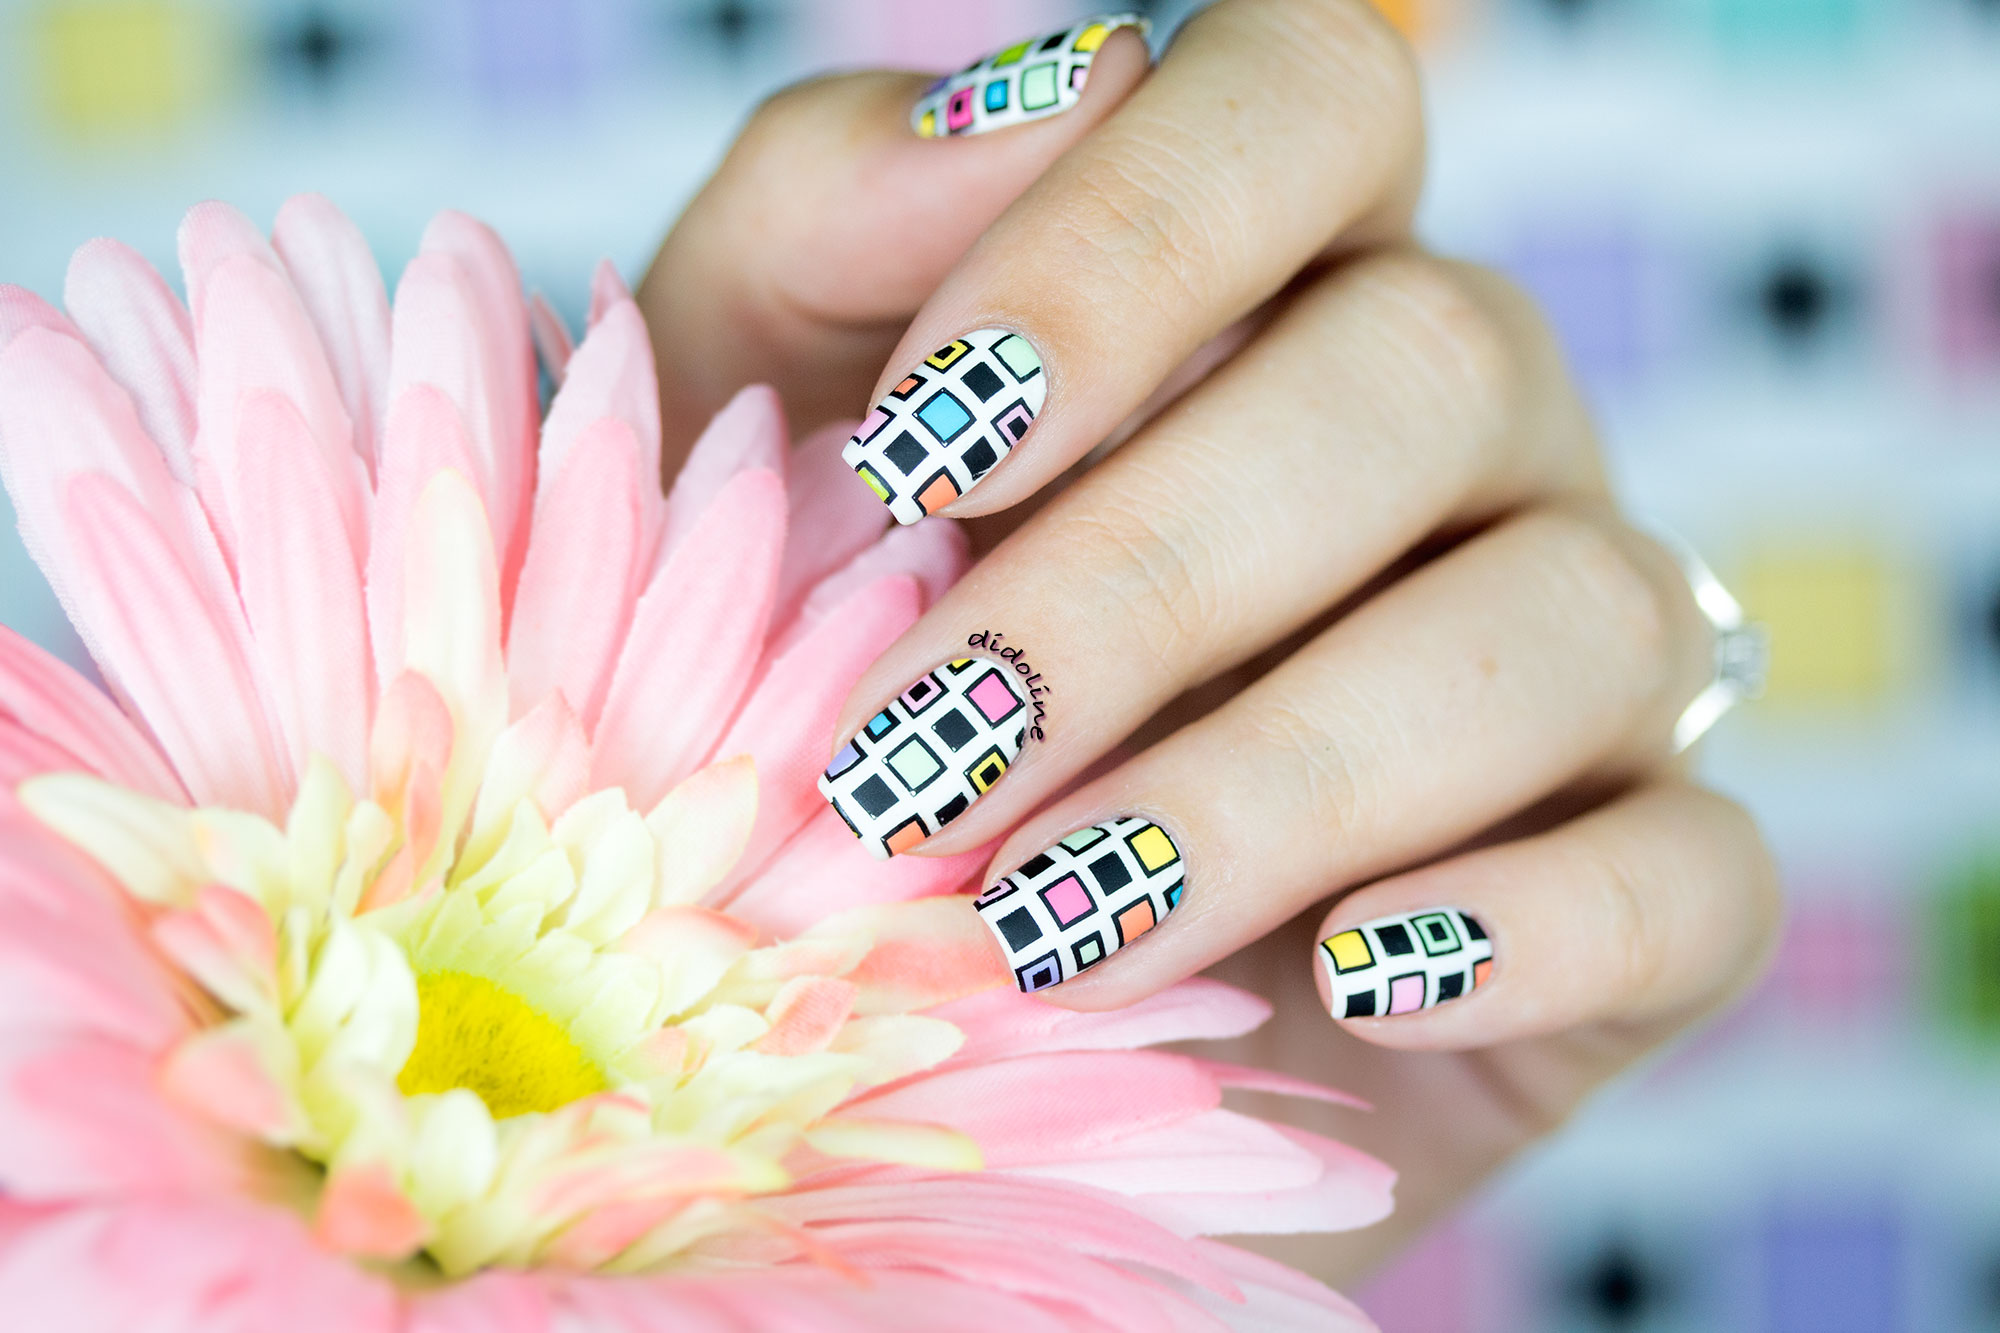 Advanced Nail Art Training: Courses, Classes, and Workshops - wide 5